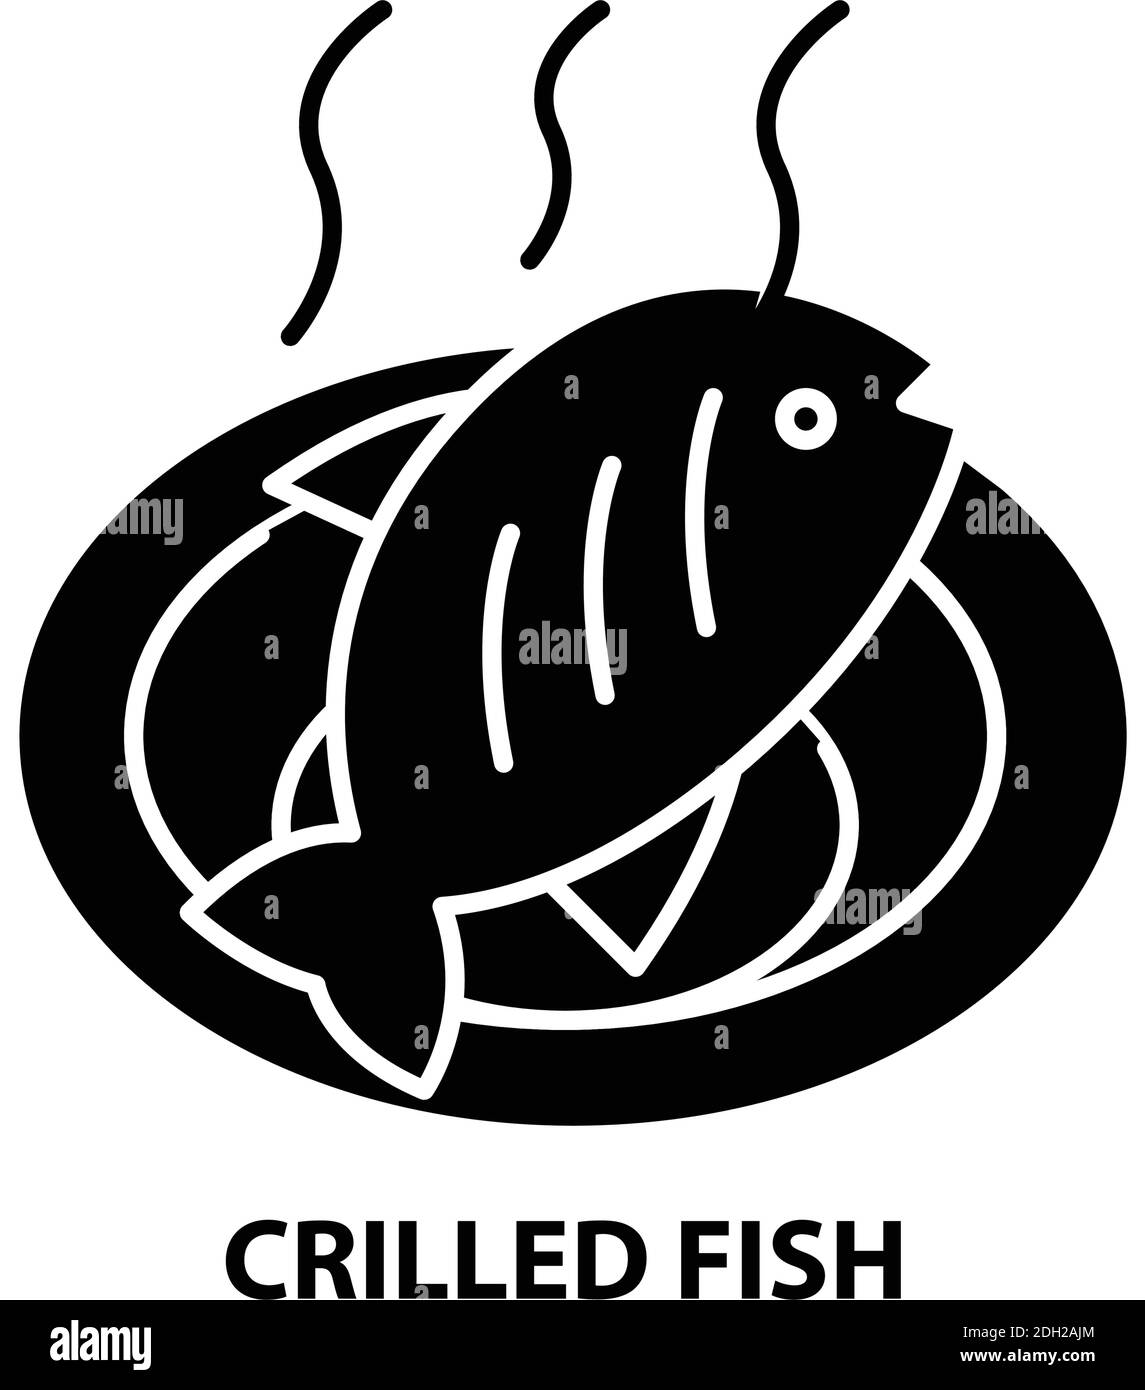 grilled fish icon, black vector sign with editable strokes, concept illustration Stock Vector